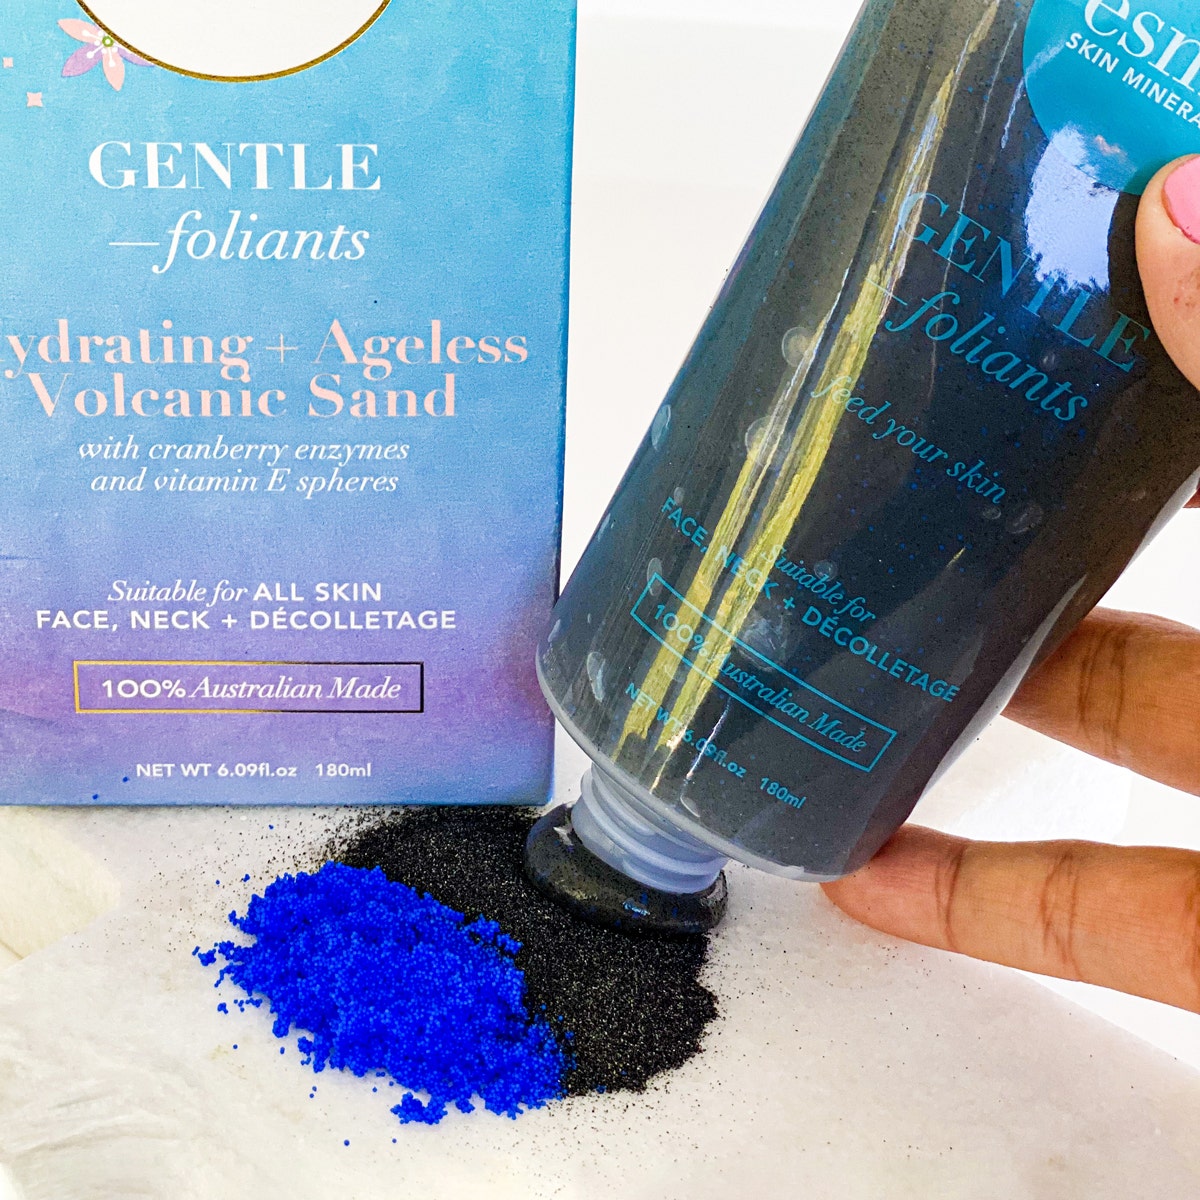 esmi hydrating and ageless volcanic sand gentle foliant contains sodium hyaluronate to combat dryness